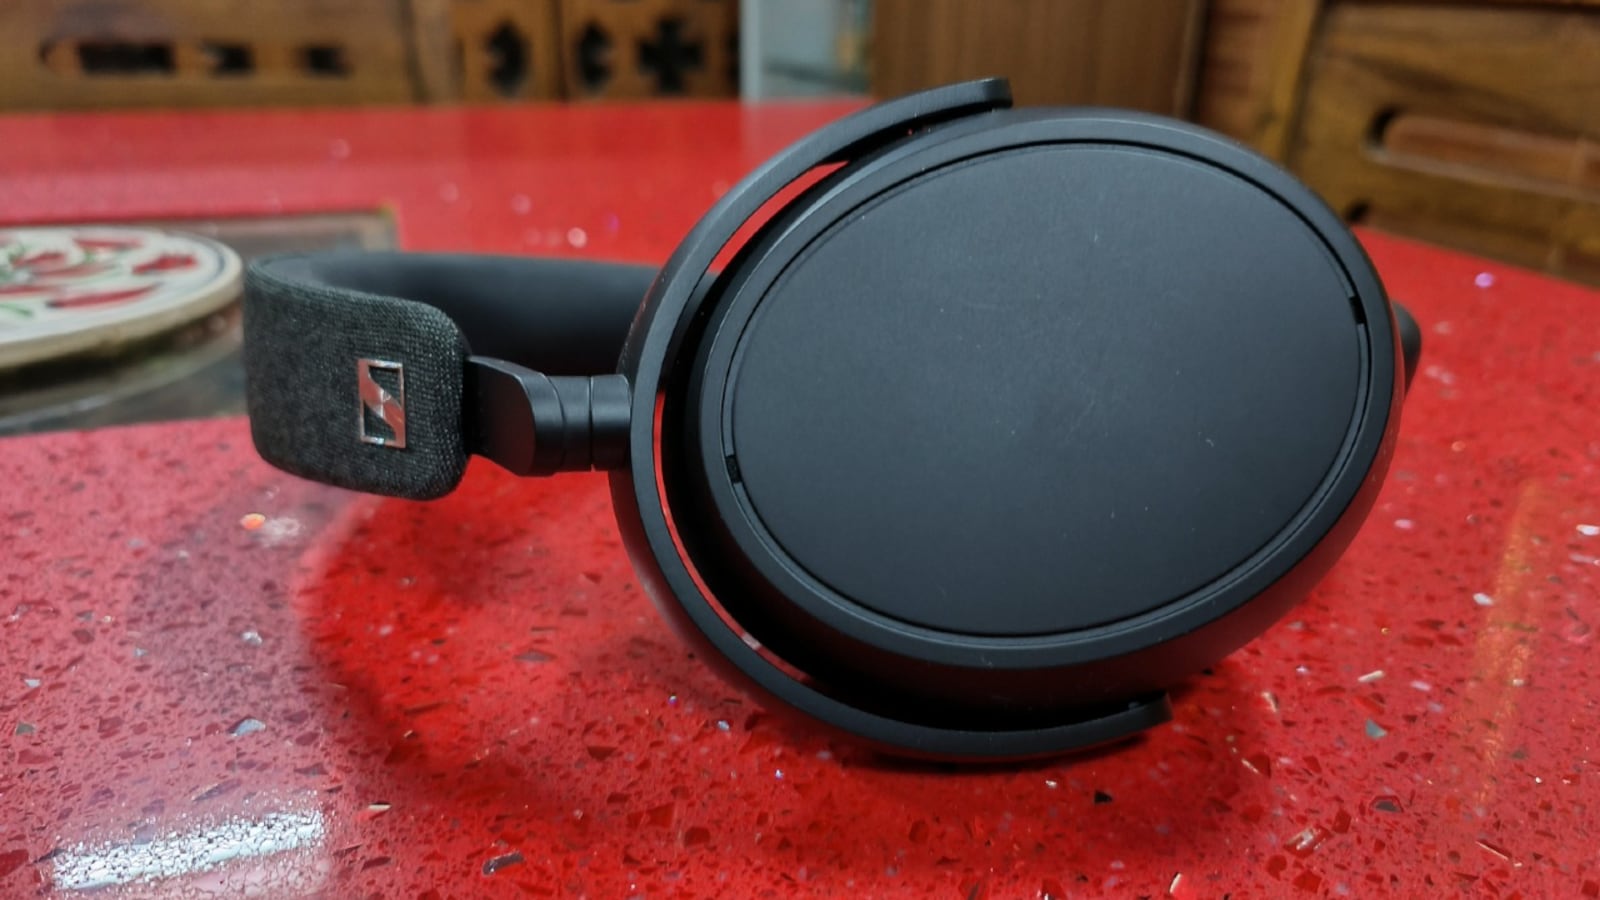 Sennheiser Momentum 4: They cost a mint, so are they worth it